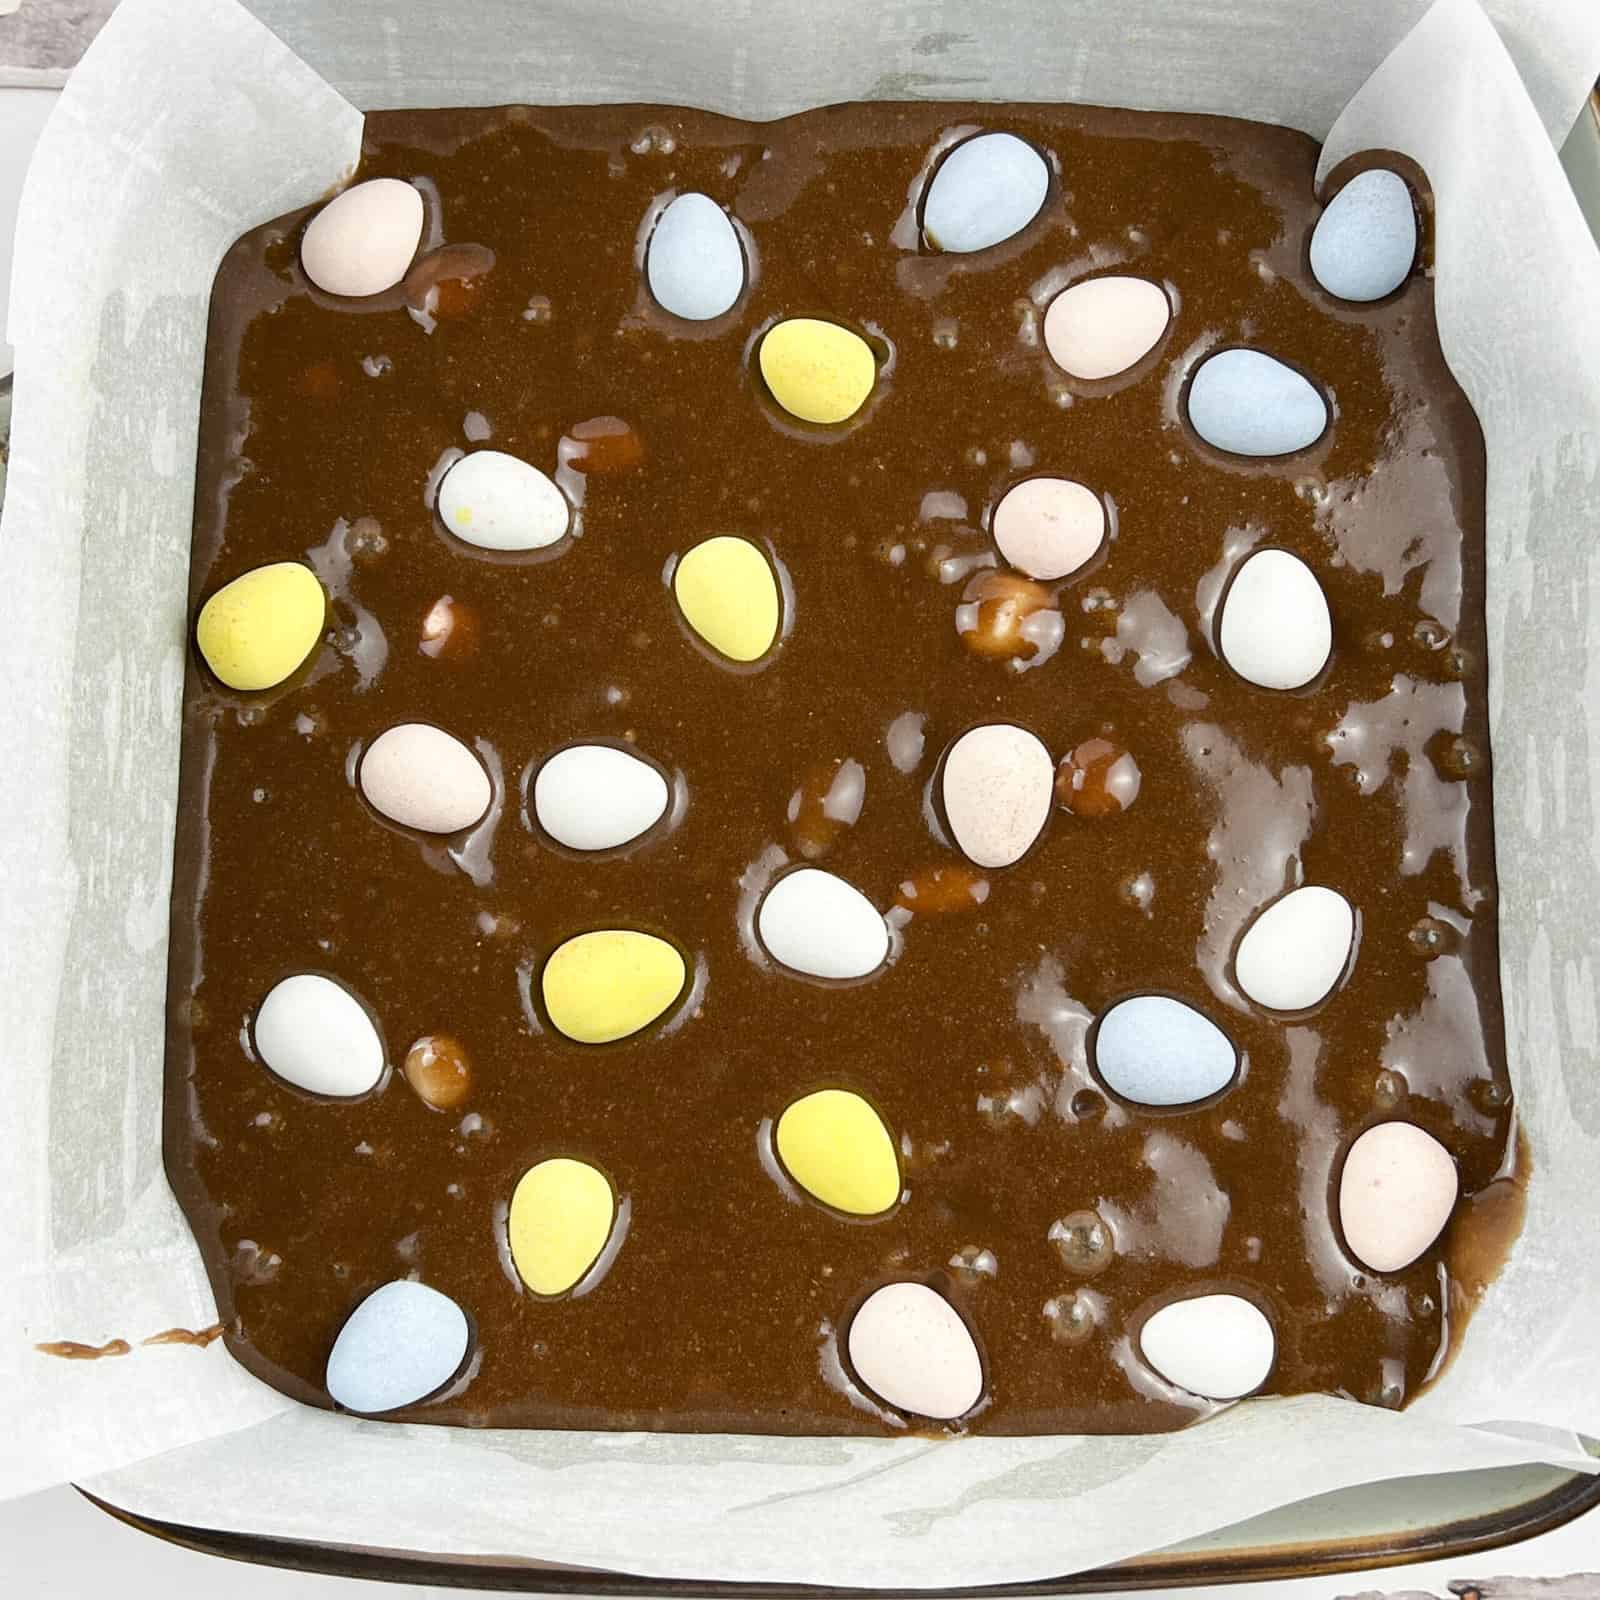 Brownie batter with chocolate mini eggs sprinkled on top.